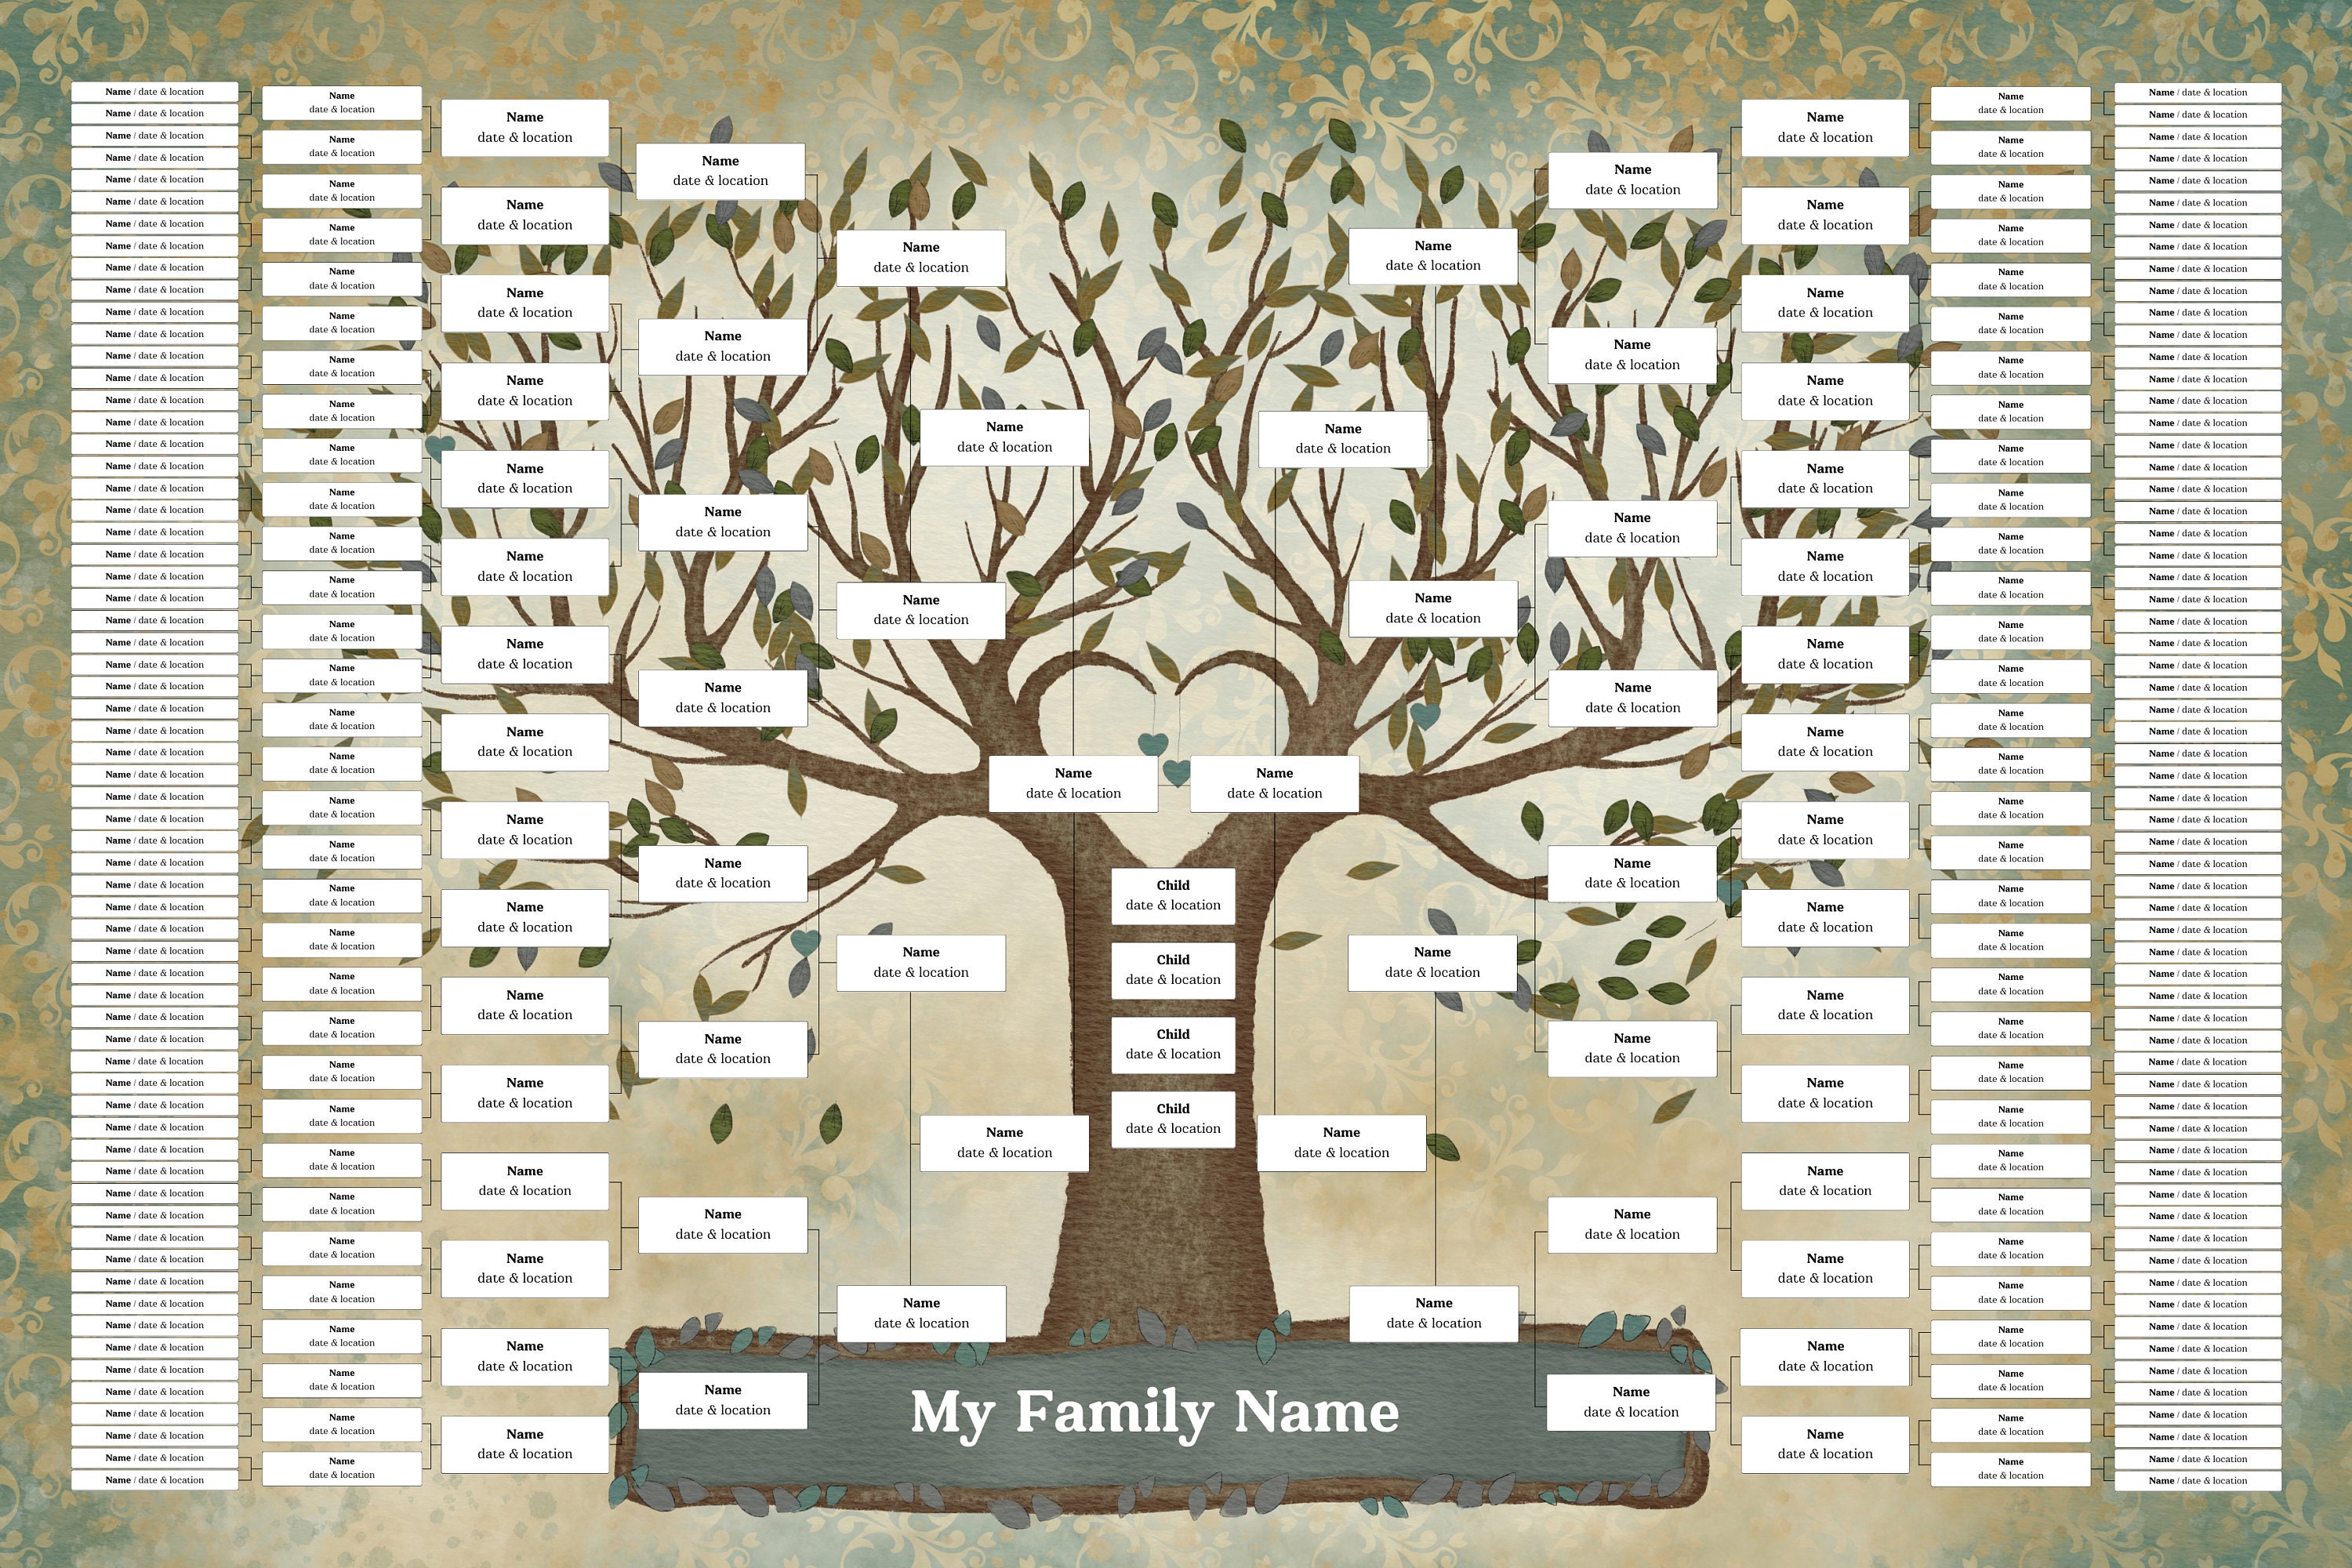 Family Tree Charts To Fill In Blank Ancestry Chart Blank Genealogy Supplies  To Be Personalized With Your Children Partner